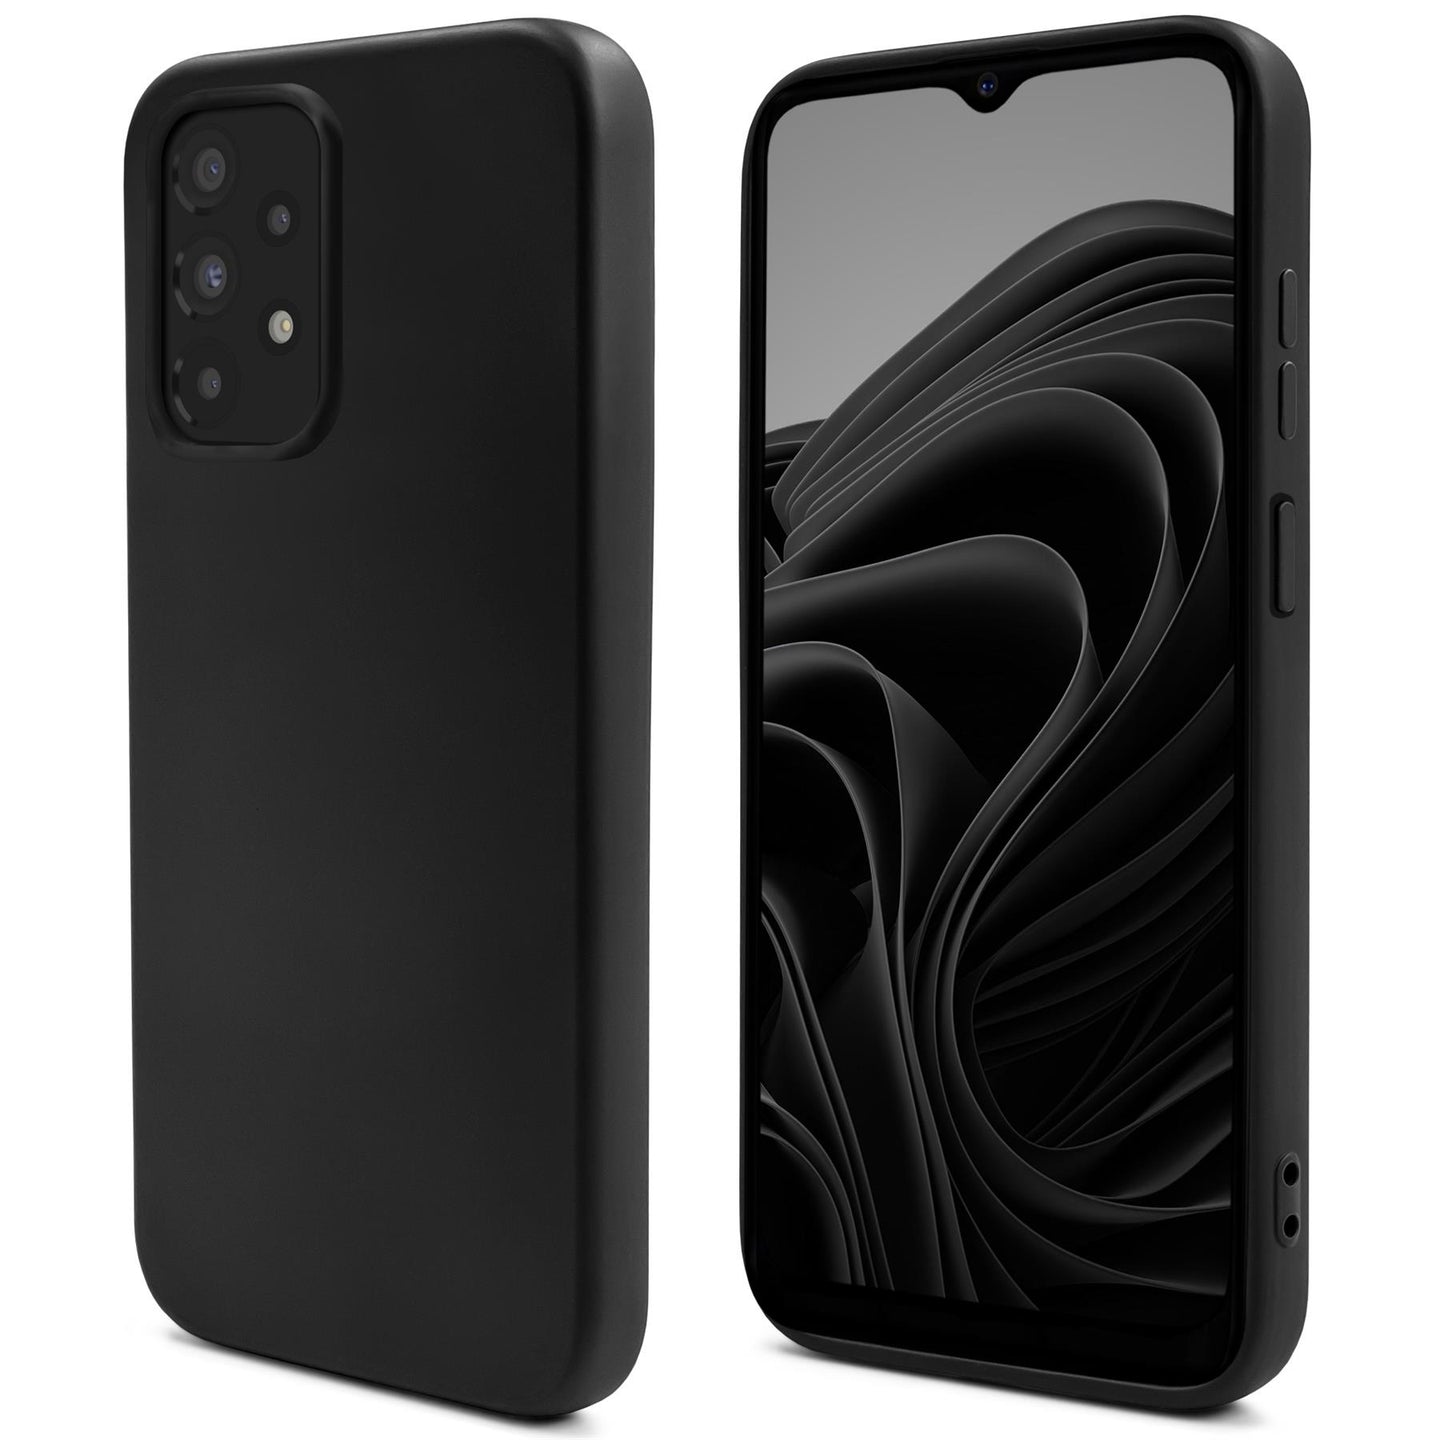 Moozy Lifestyle. Silicone Case for Samsung A13 4G, Black - Liquid Silicone Lightweight Cover with Matte Finish and Soft Microfiber Lining, Premium Silicone Case